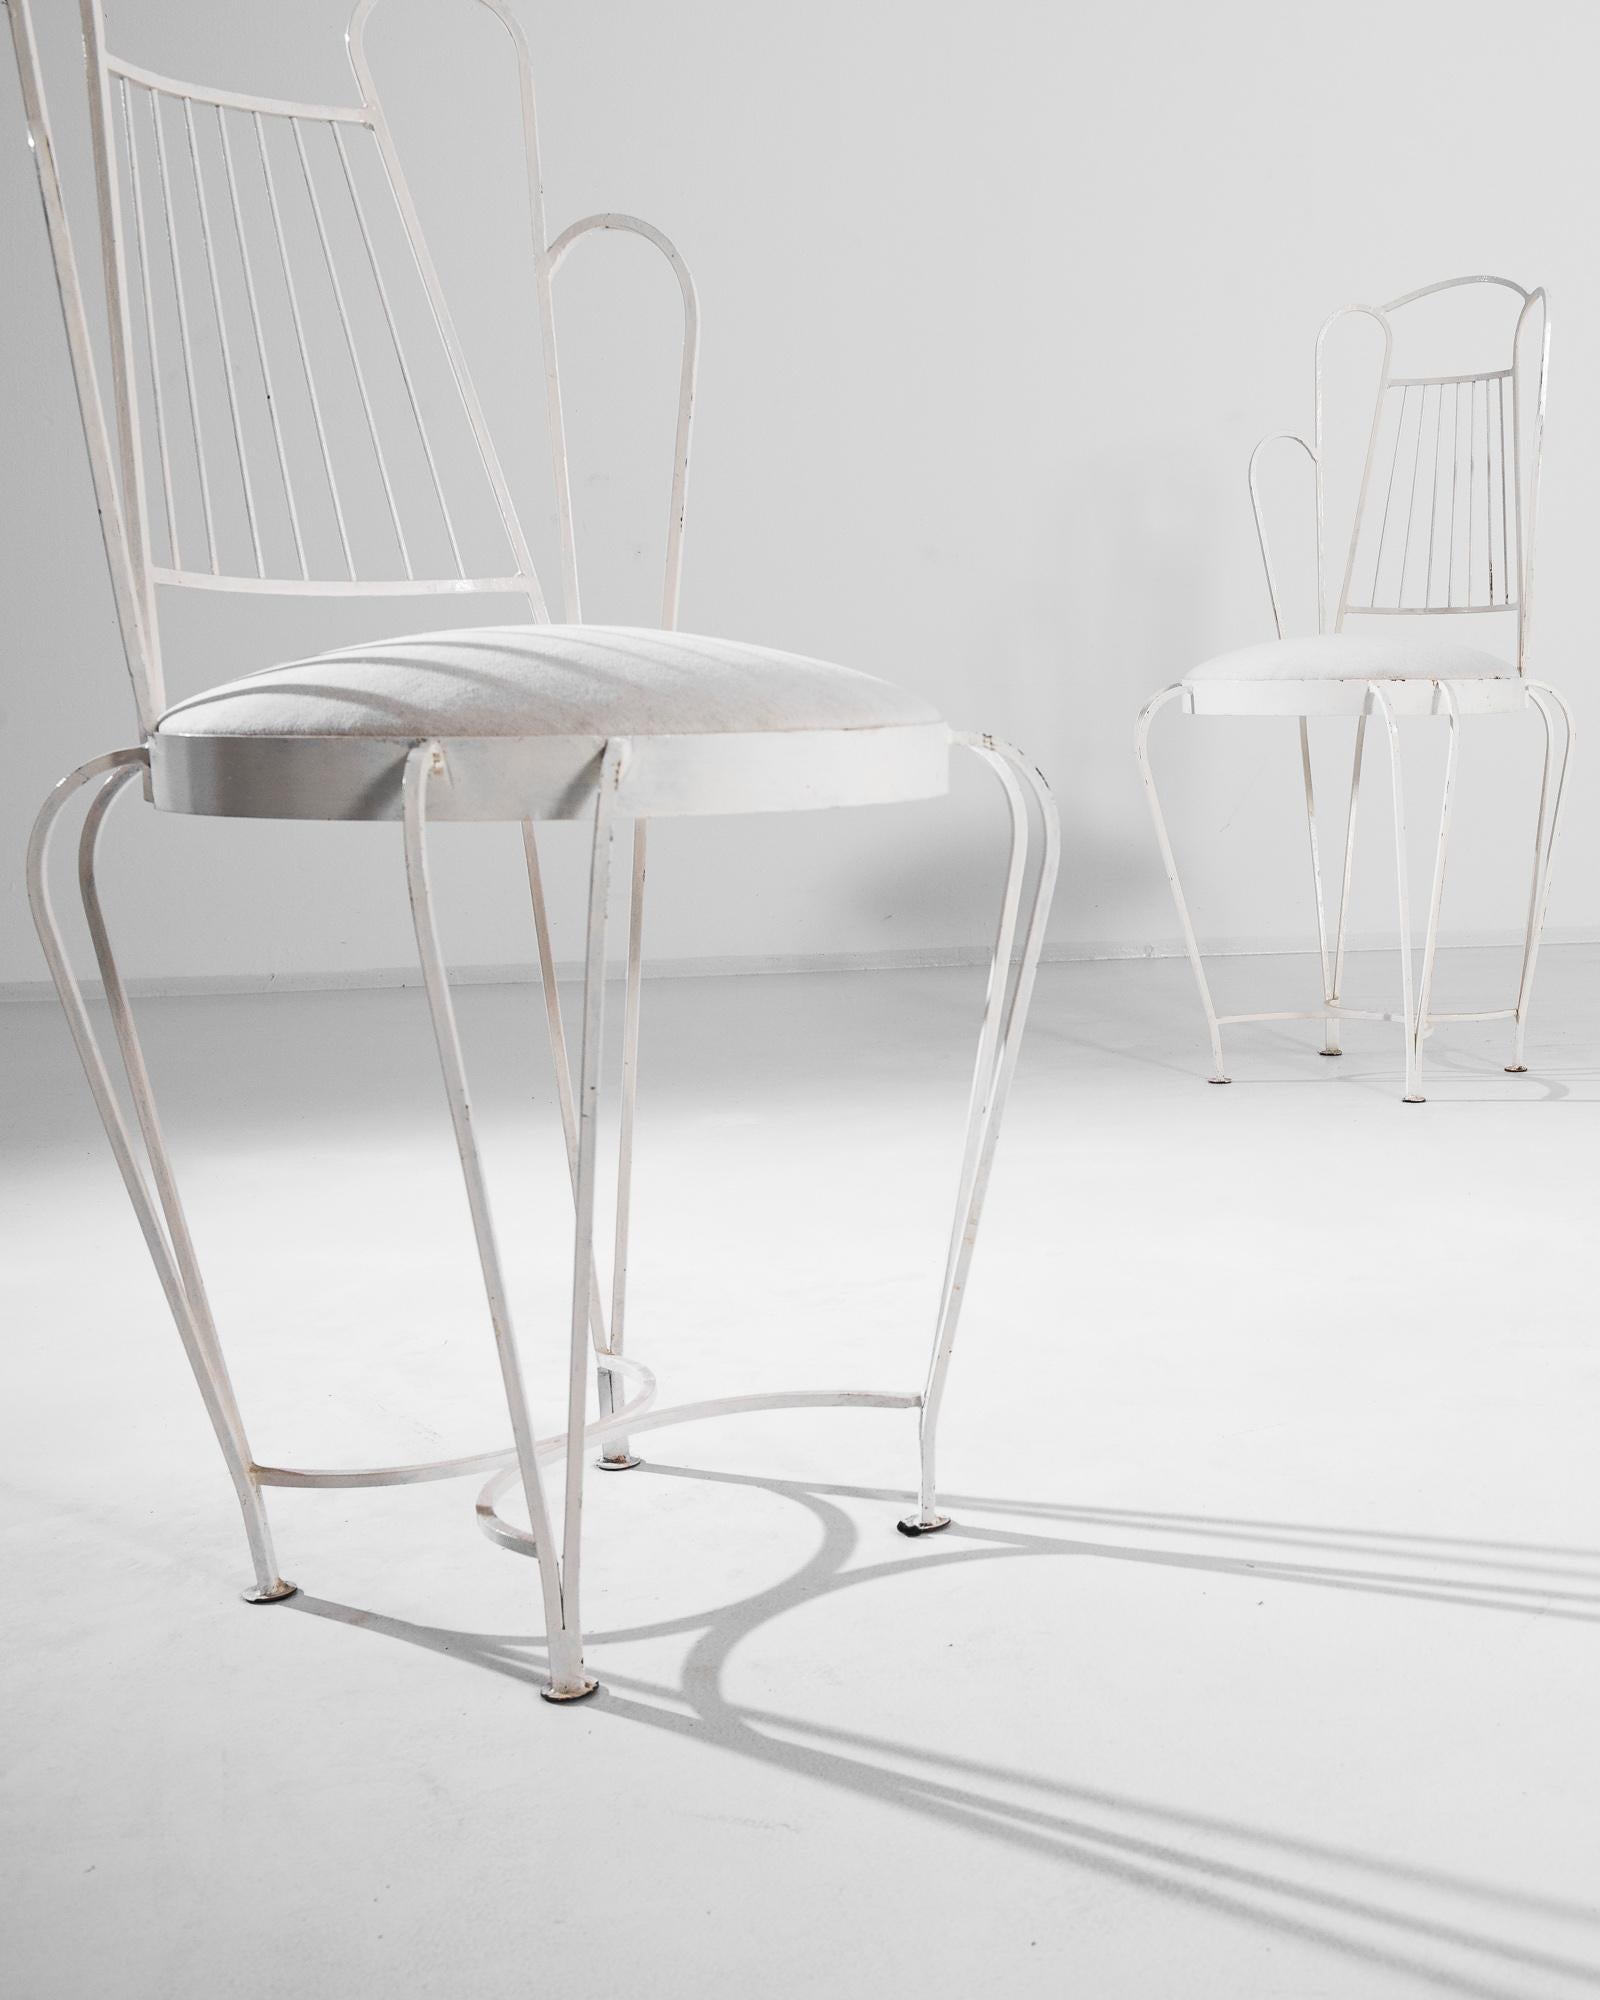 A pair of metal garden chairs from 1950s France in crisp white. The sinuous design of the metal frame forms a simple yet poetic silhouette. Cabriole legs, tapering to precise points, support an upholstered circular seat, while the lyre-shaped